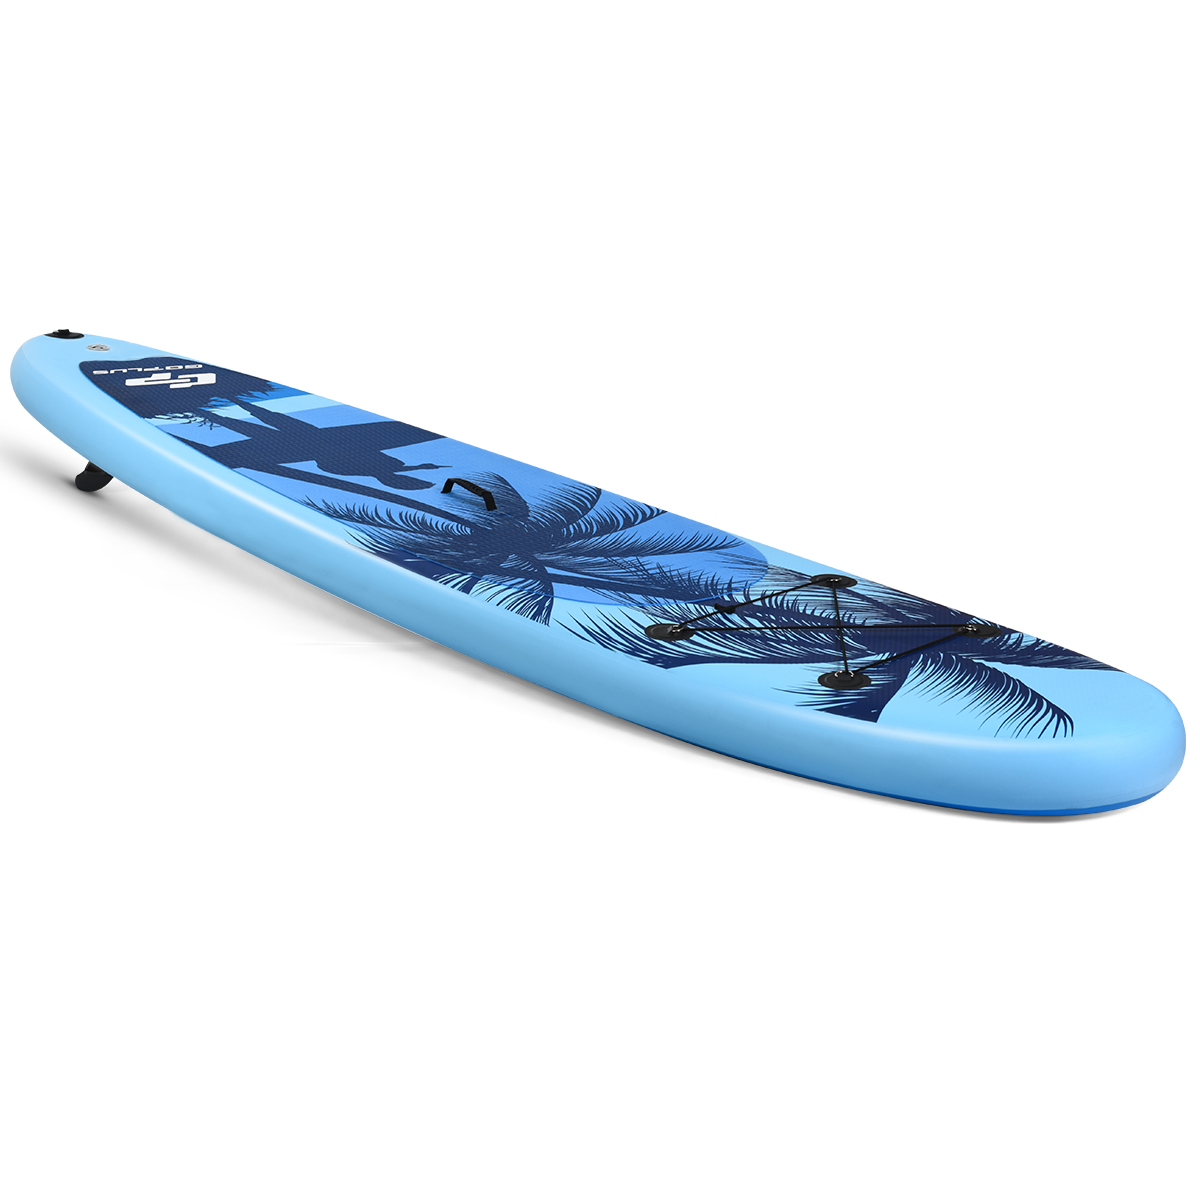 Paddle, Stand Blau COSTWAY Up SUP Board